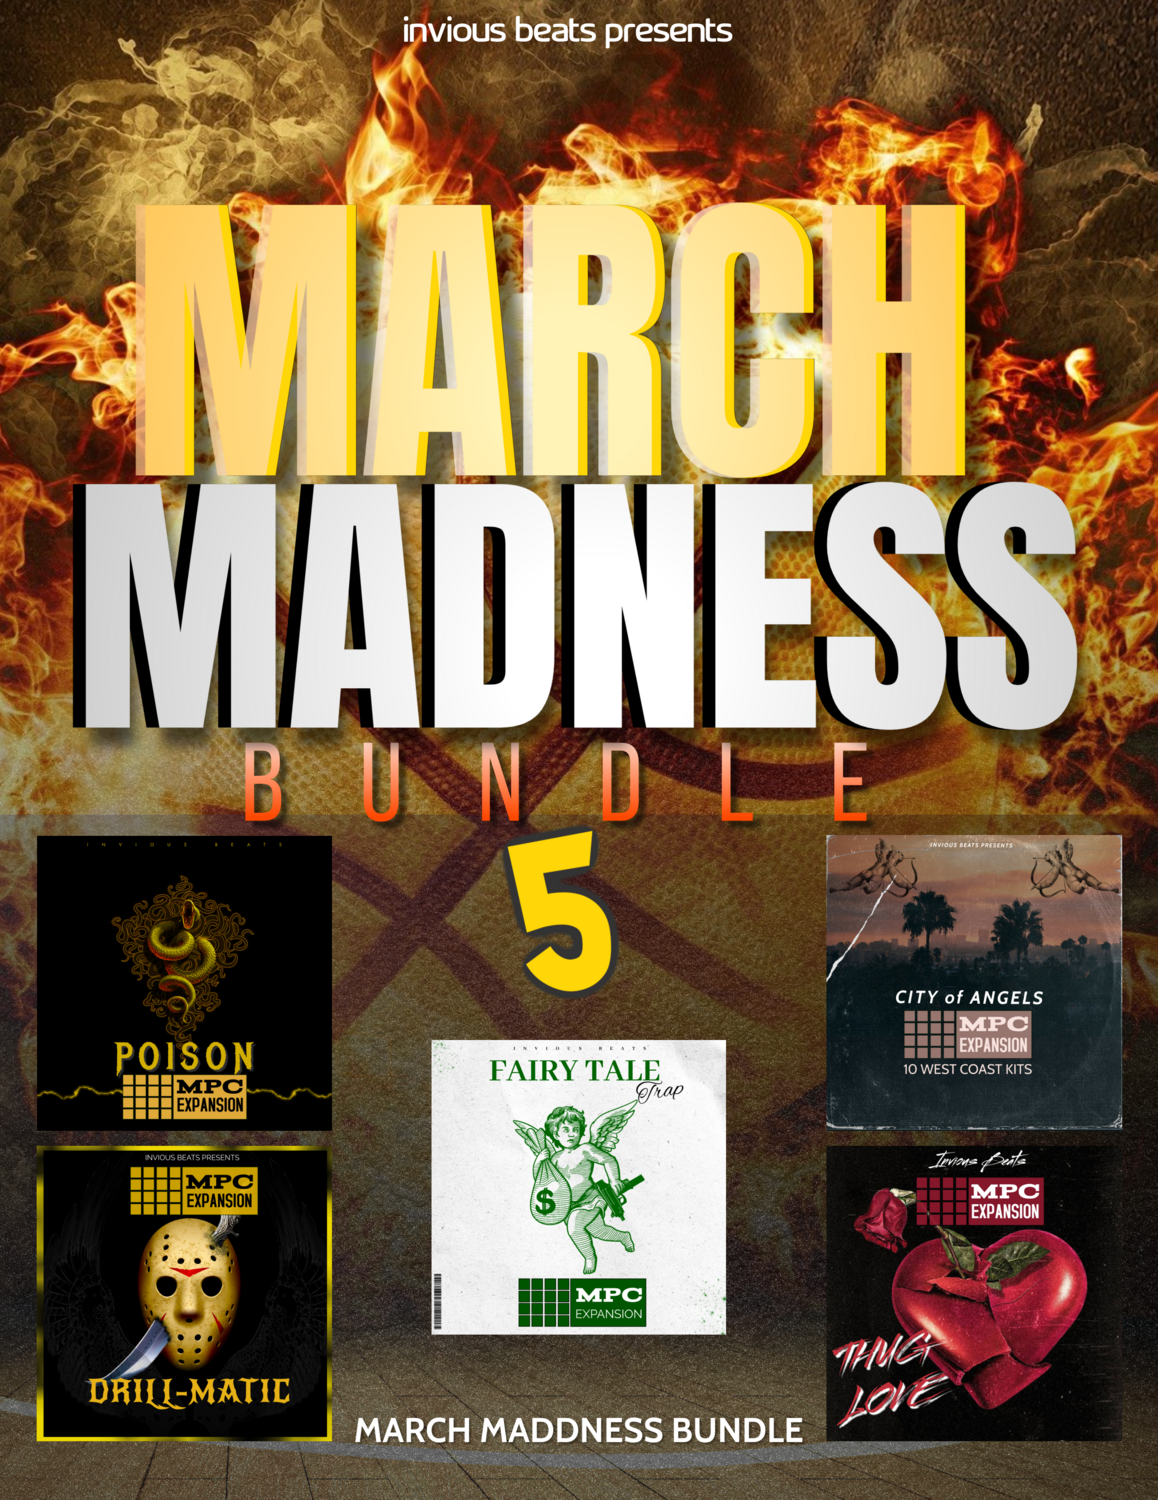 MPC EXPANSION 'MARCH MADDNESS 5' by INVIOUS